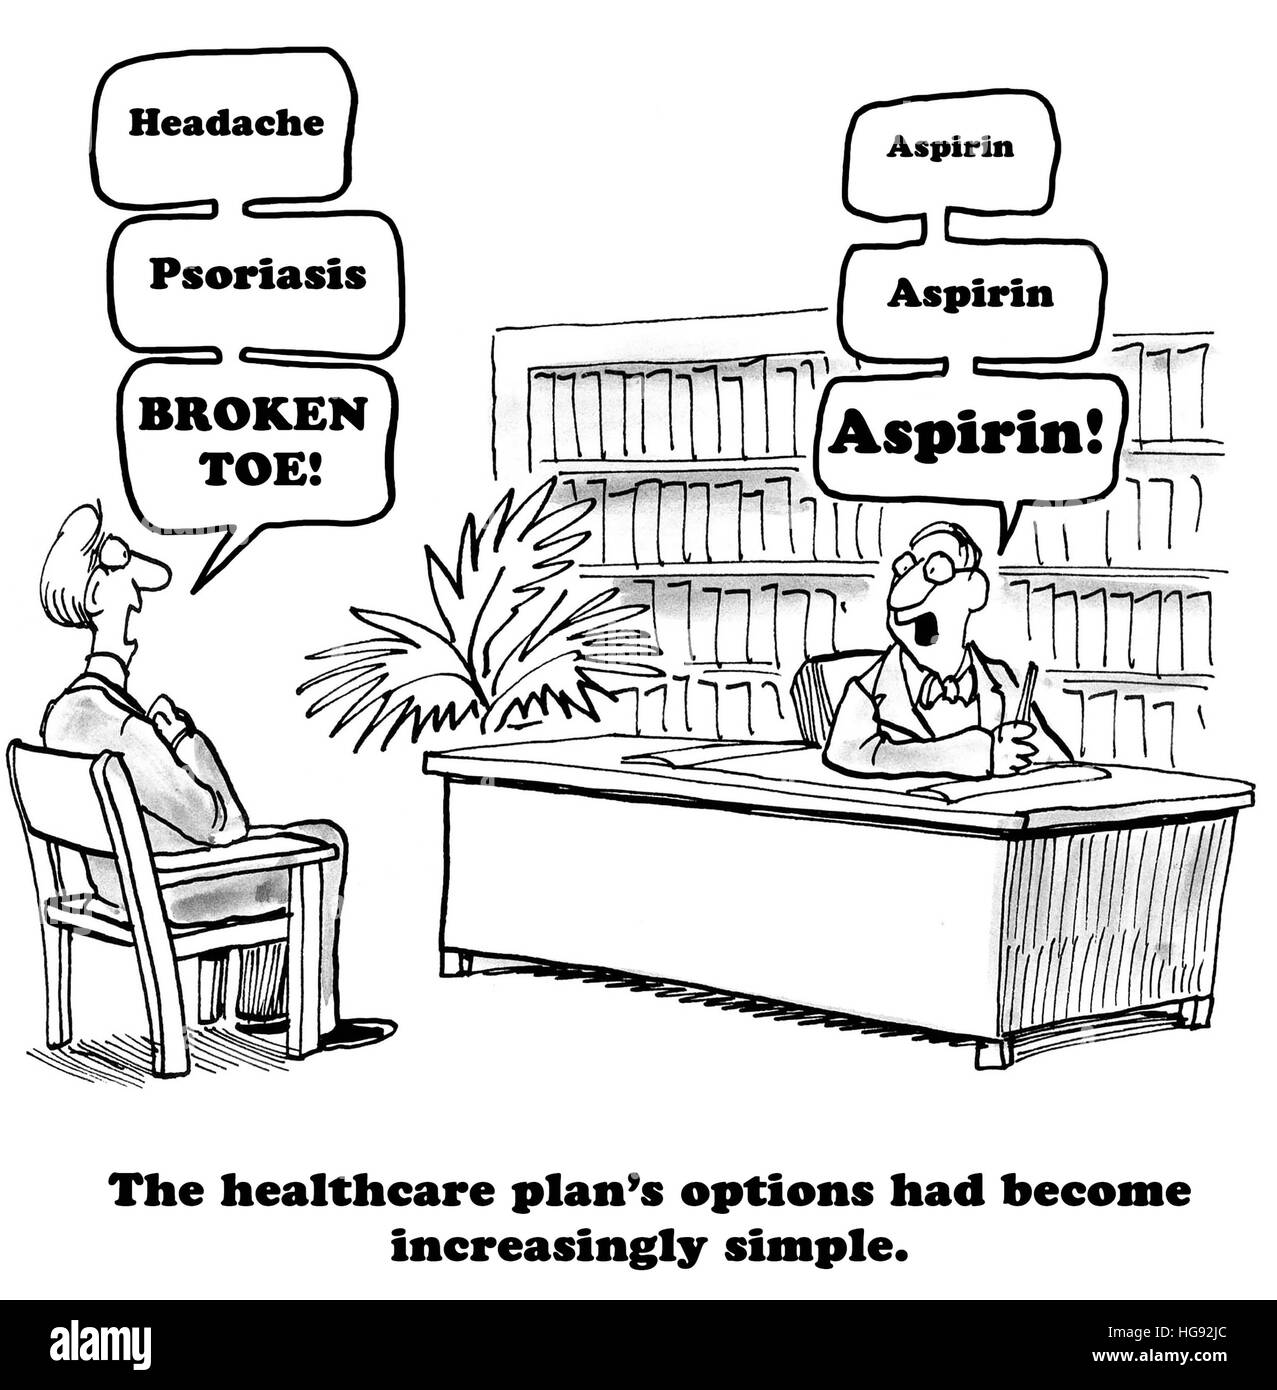 Health cartoon about how the medical insurance plan has dramatically limited its options for prescription coverage. Stock Photo